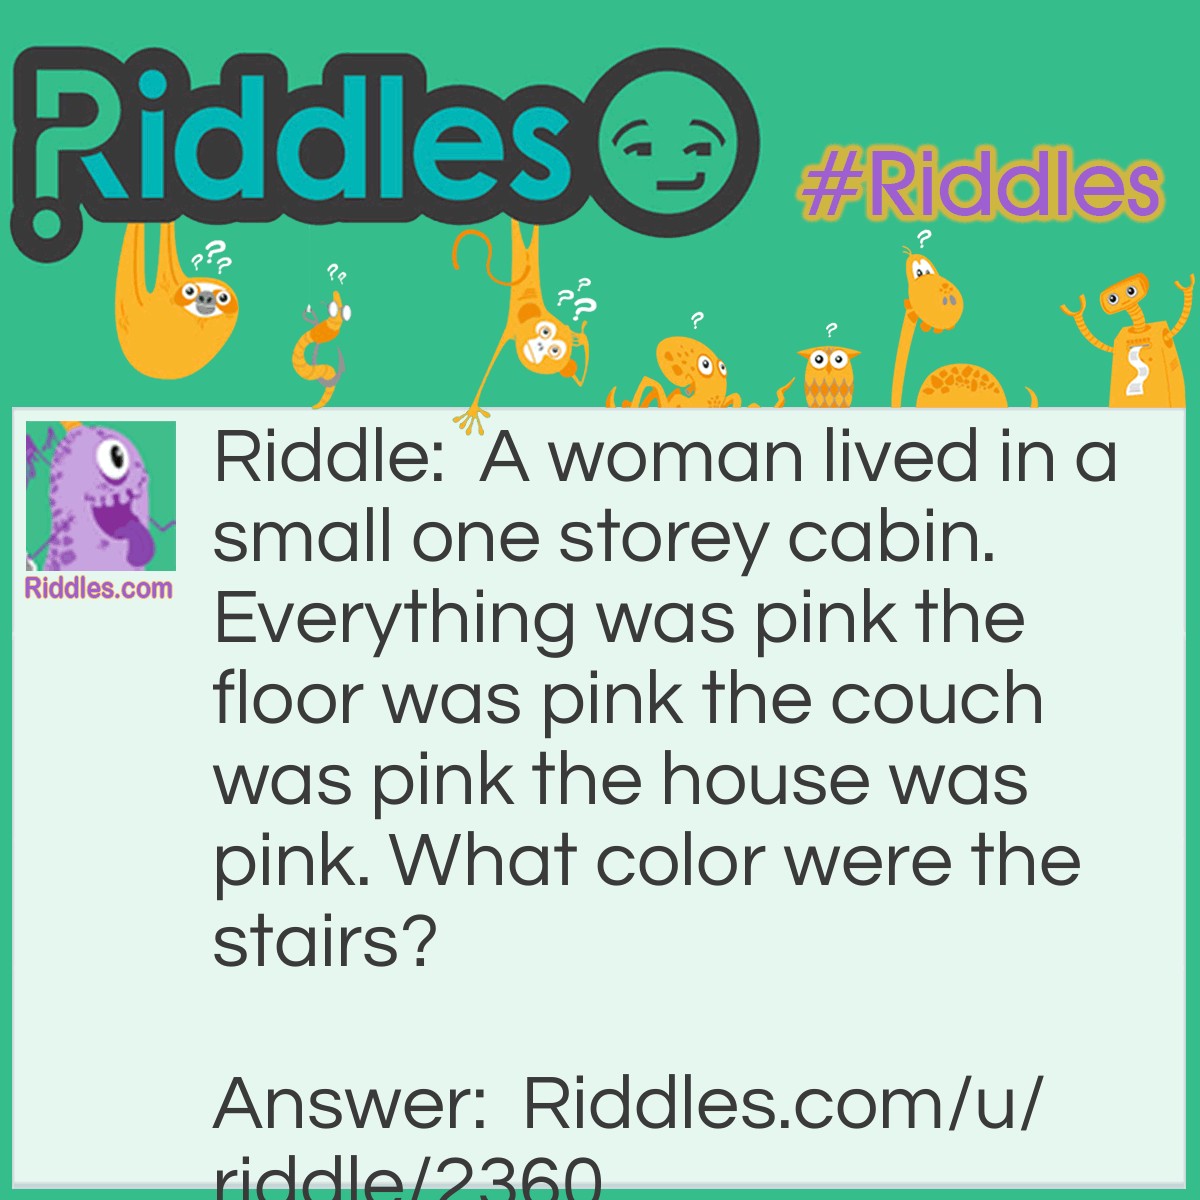 Riddle: A woman lived in a small one storey cabin. Everything was pink the floor was pink the couch was pink the house was pink. What color were the stairs? Answer: There were no stairs, its a one storey cabin.